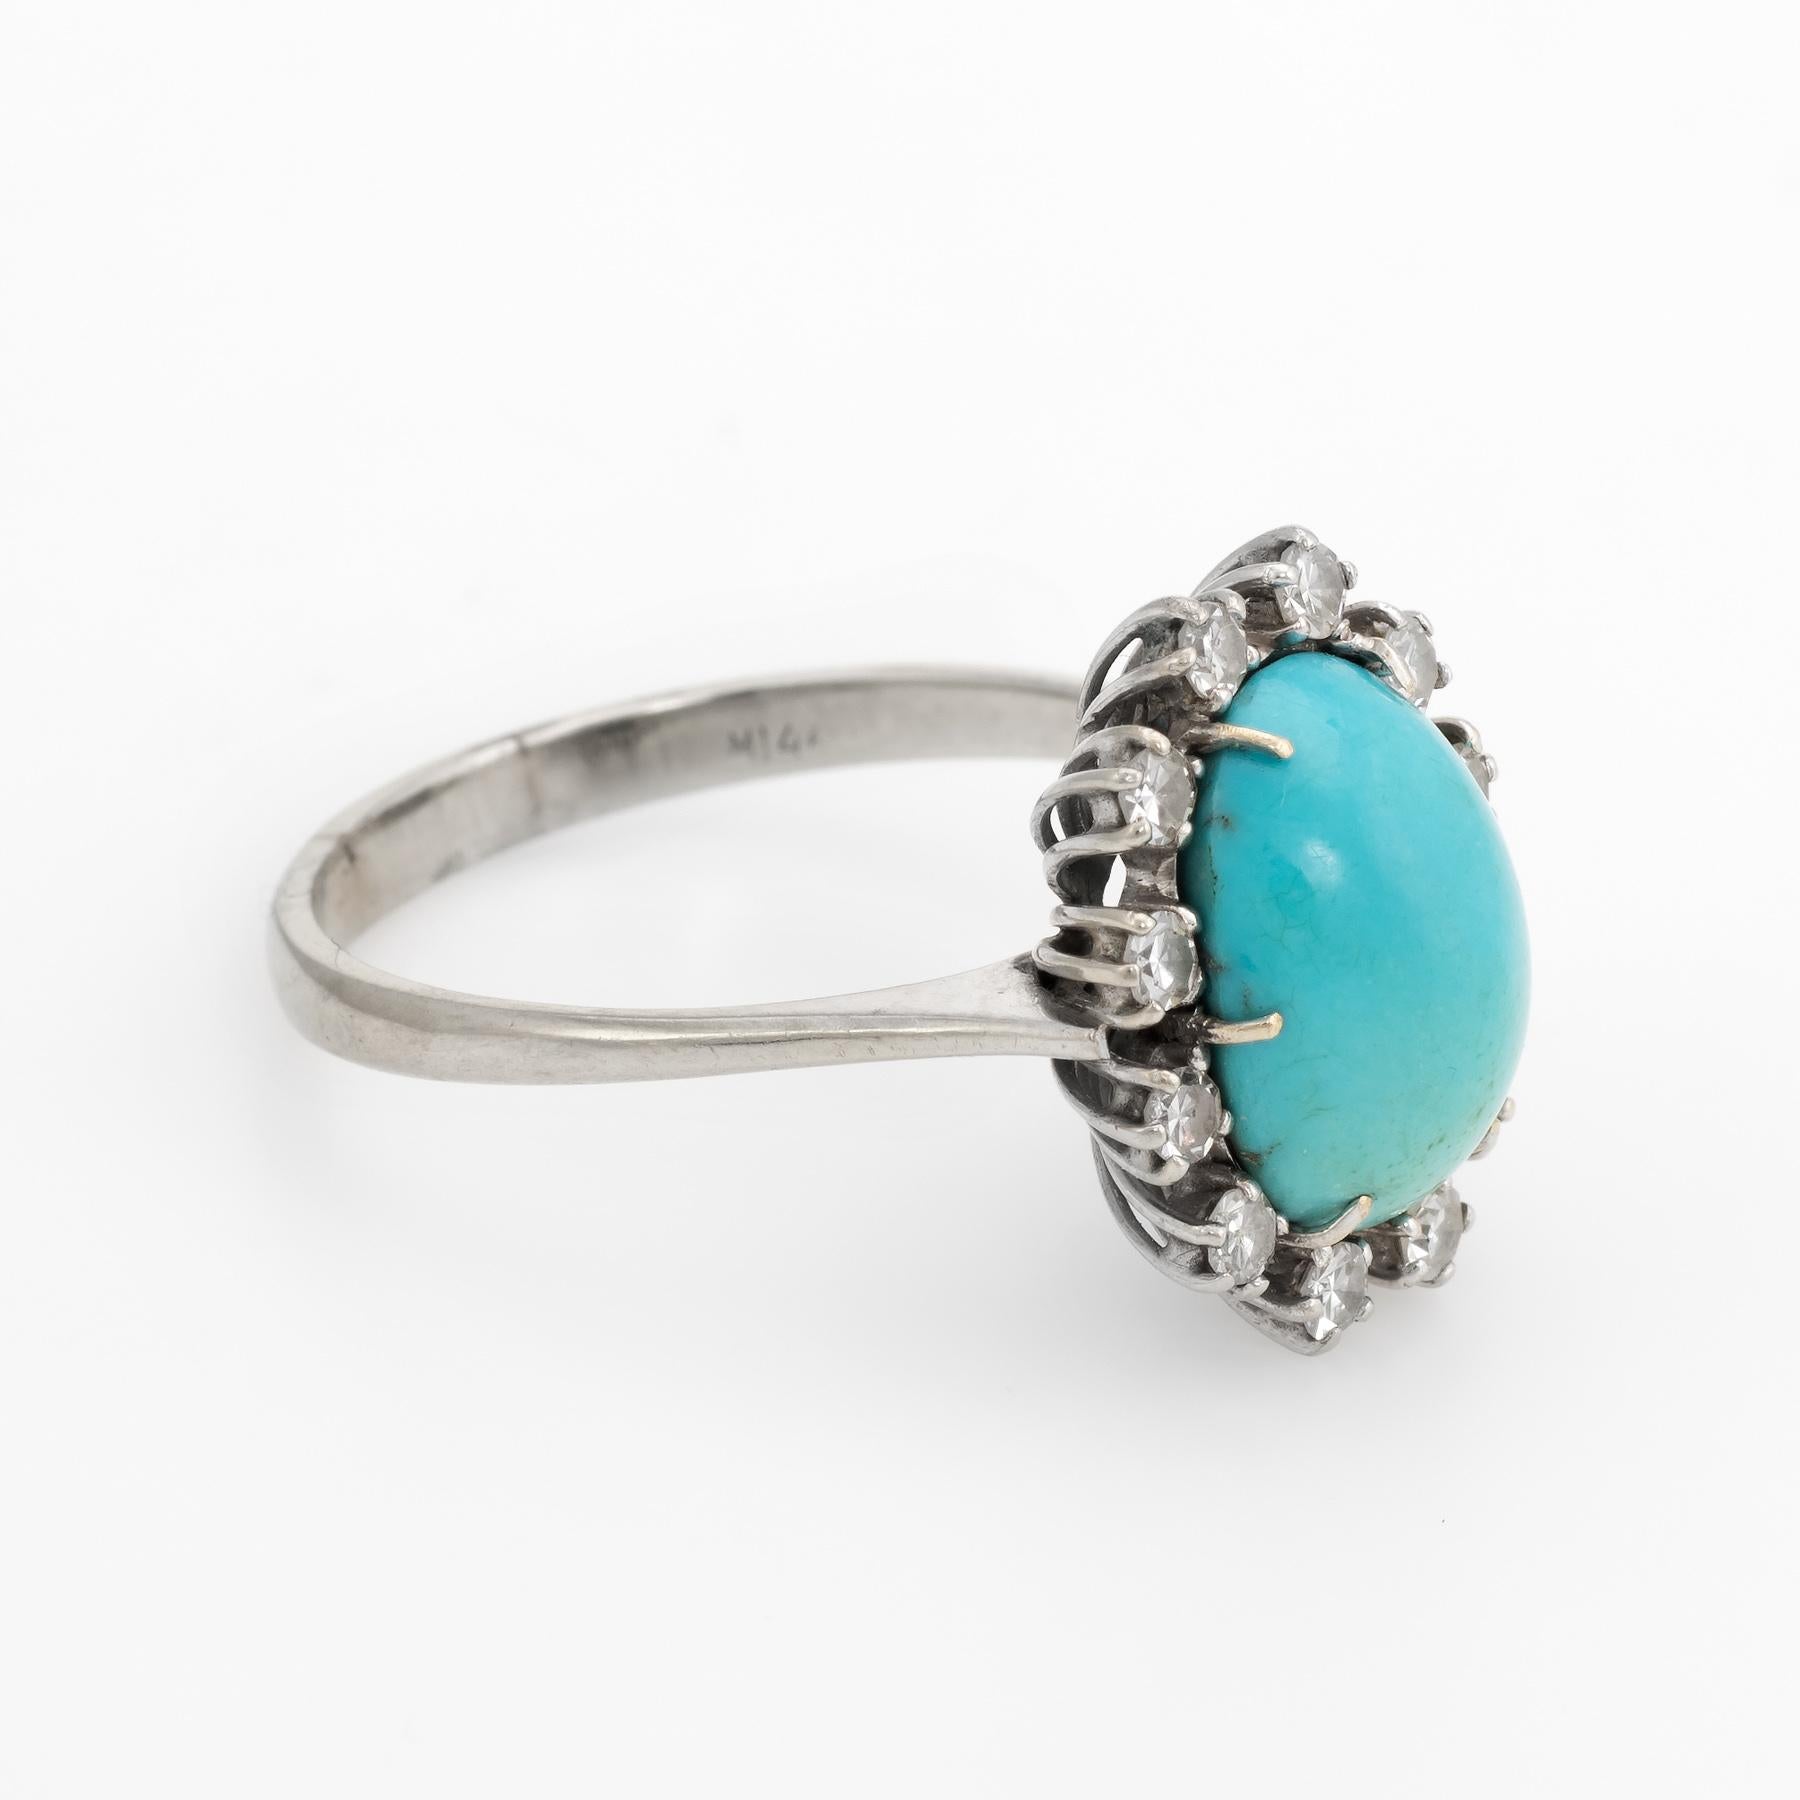 Elegant vintage cocktail ring (circa 1950s to 1960s), crafted in 18 karat white gold. 

Centrally mounted cabochon cut Persian turquoise measures 12mm x 9mm (estimated at 4 carats) is accented with 11 approx. 0.03 carat single cut diamonds (0.33